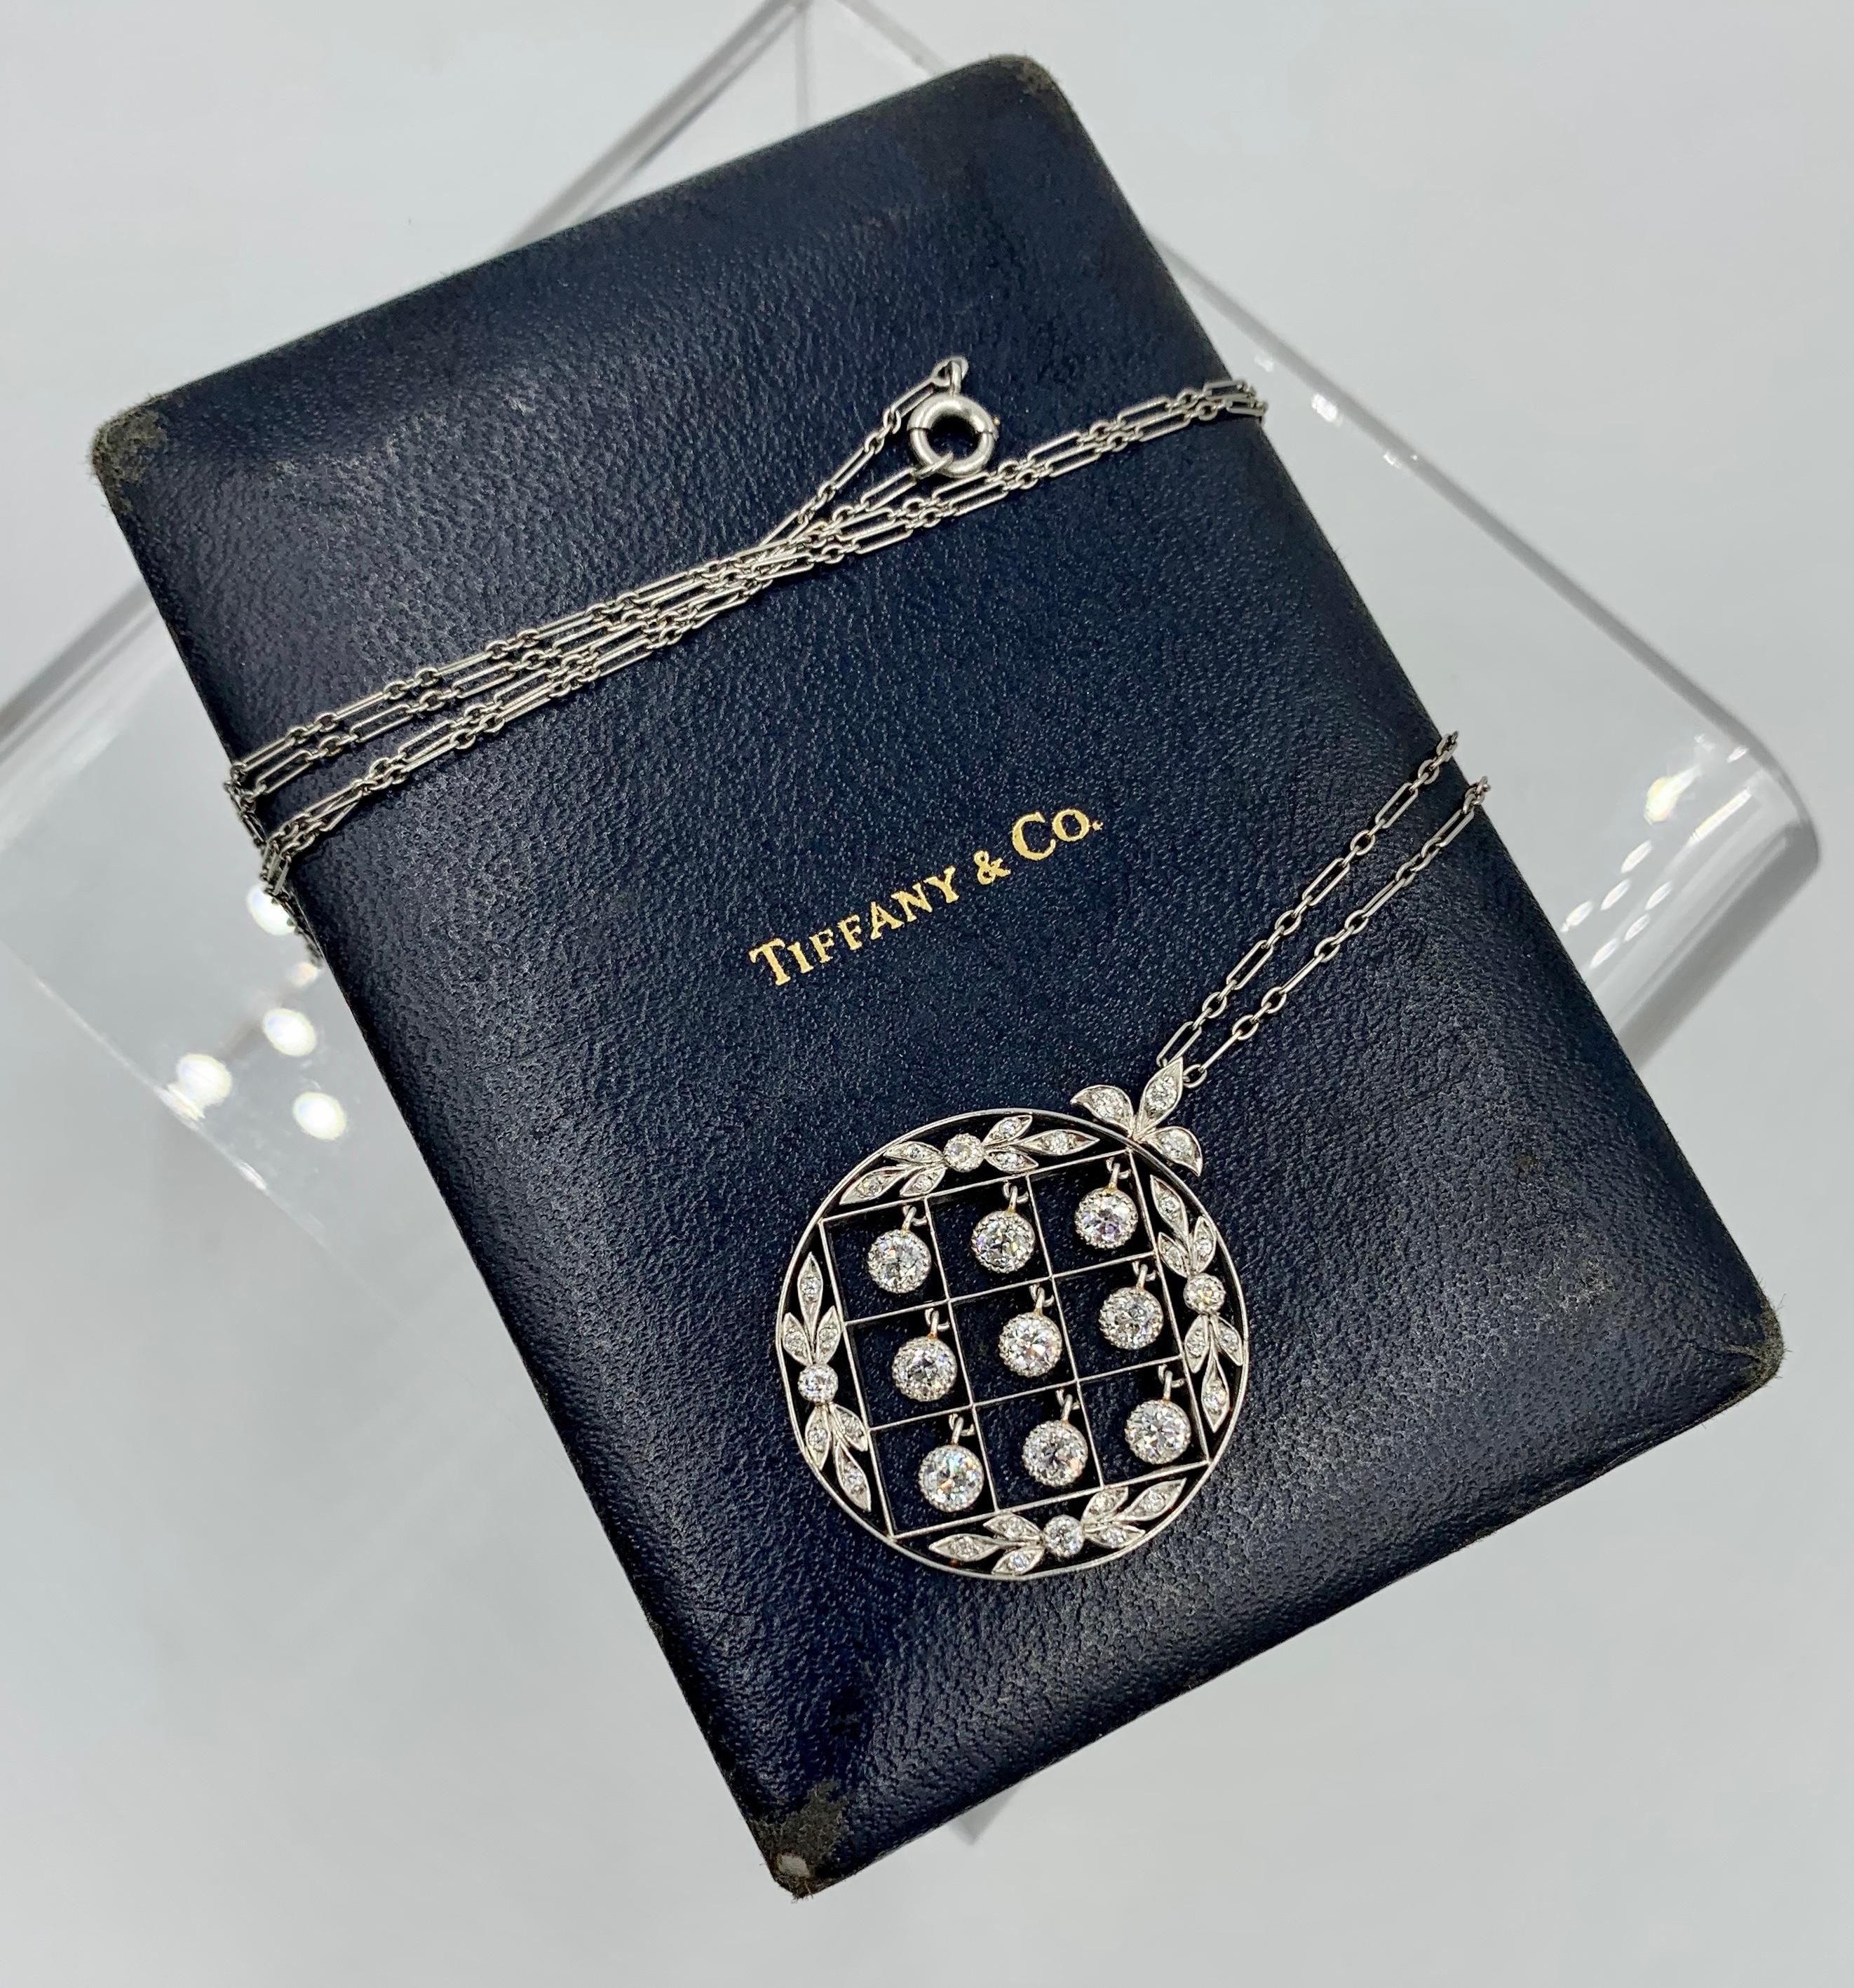 This is an extraordinary Tiffany & Co. Edwardian Pendant Necklace with over two Carats of magnificent Old Mine Cut Tiffany Diamonds set in Platinum in an open work drop dangle checkerboard motif with garland design accents.  The signed Tiffany & Co.